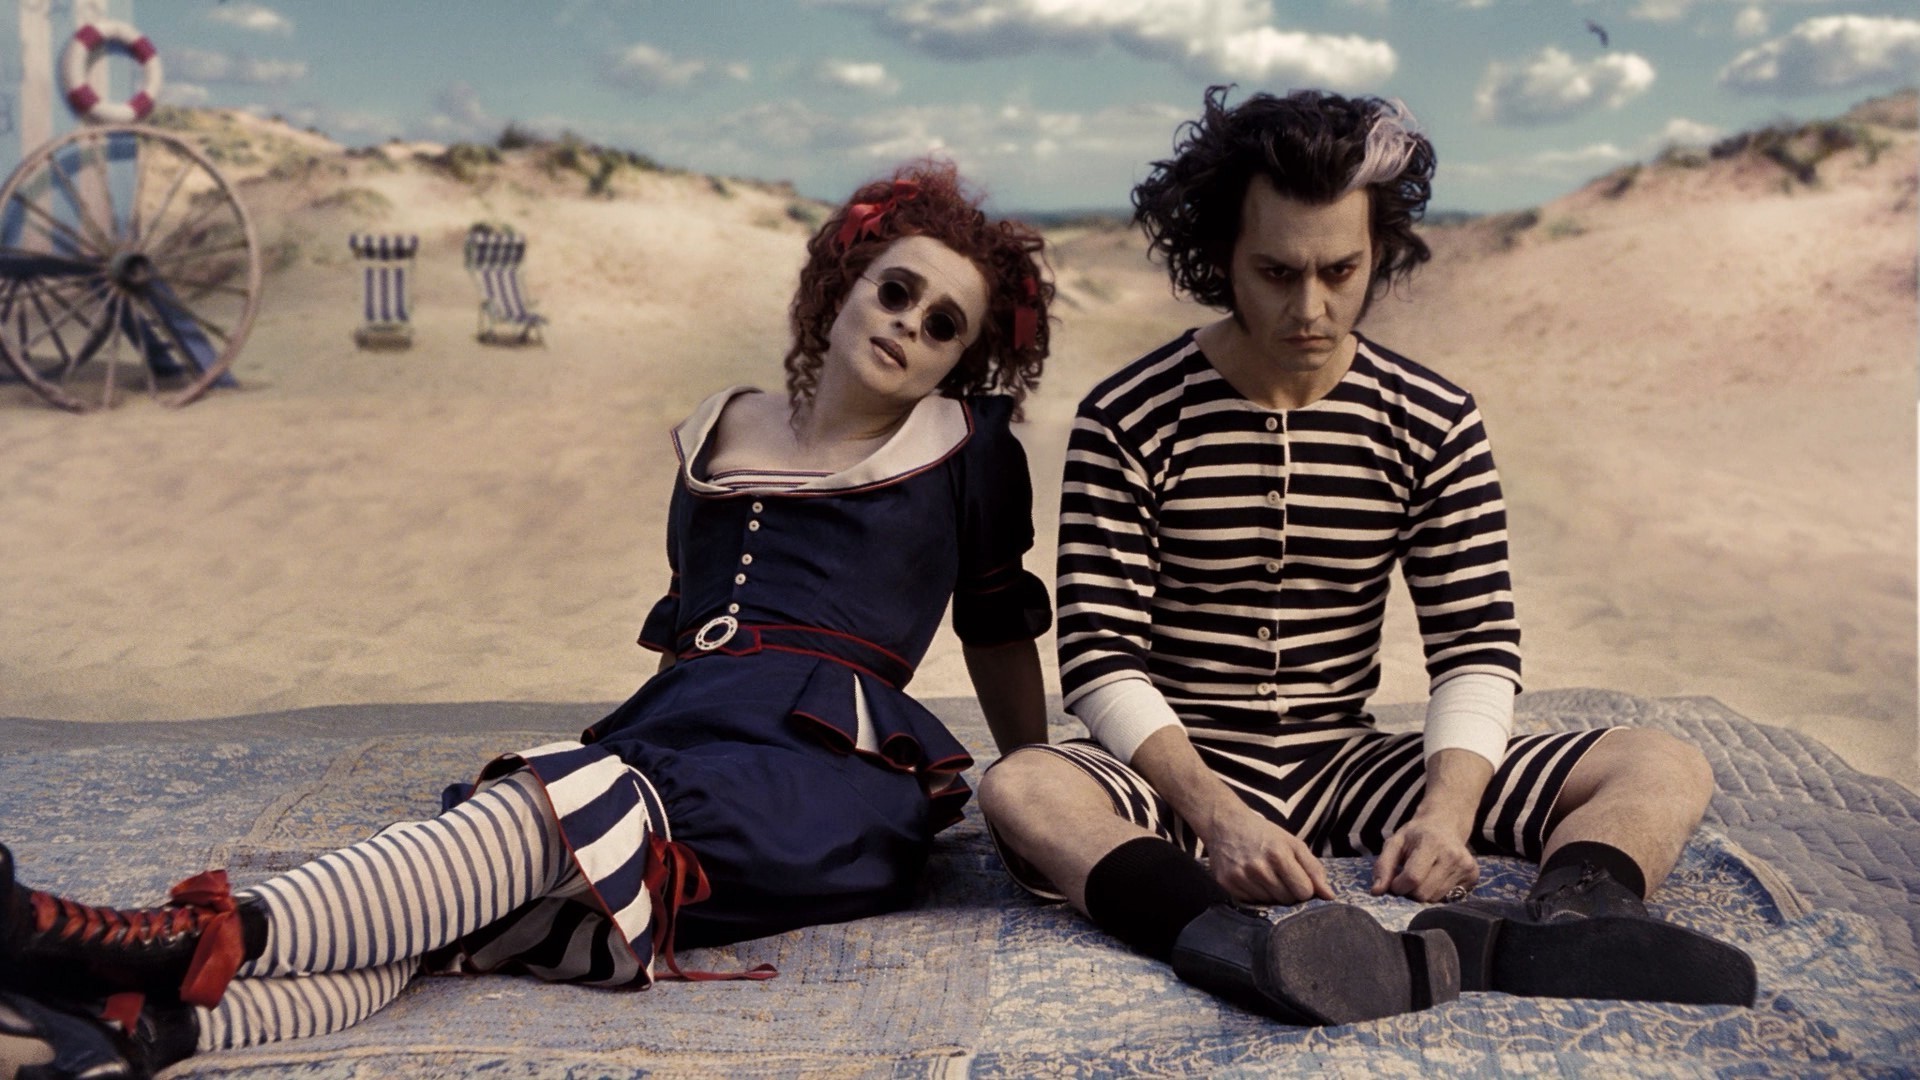 sweeney todd wallpaper,fashion,fun,photography,landscape,fictional character